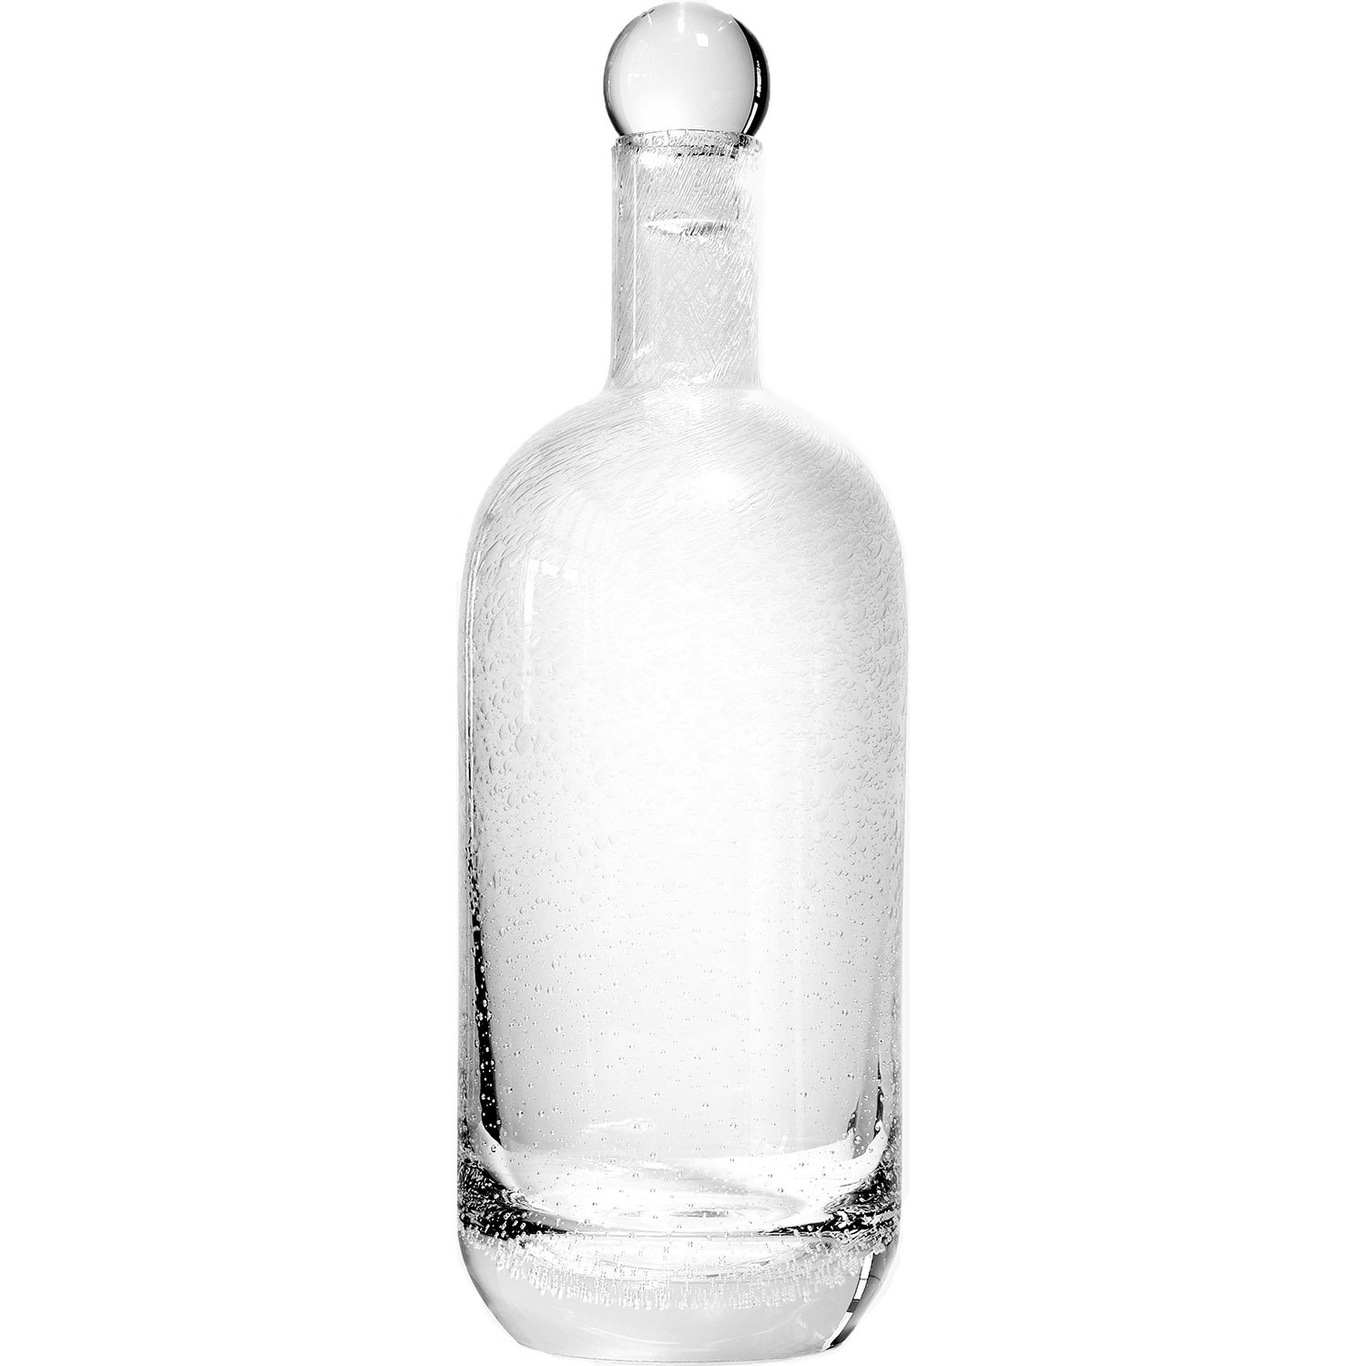 https://royaldesign.com/image/2/louise-roe-bubble-glass-carafe-tall-0?w=800&quality=80